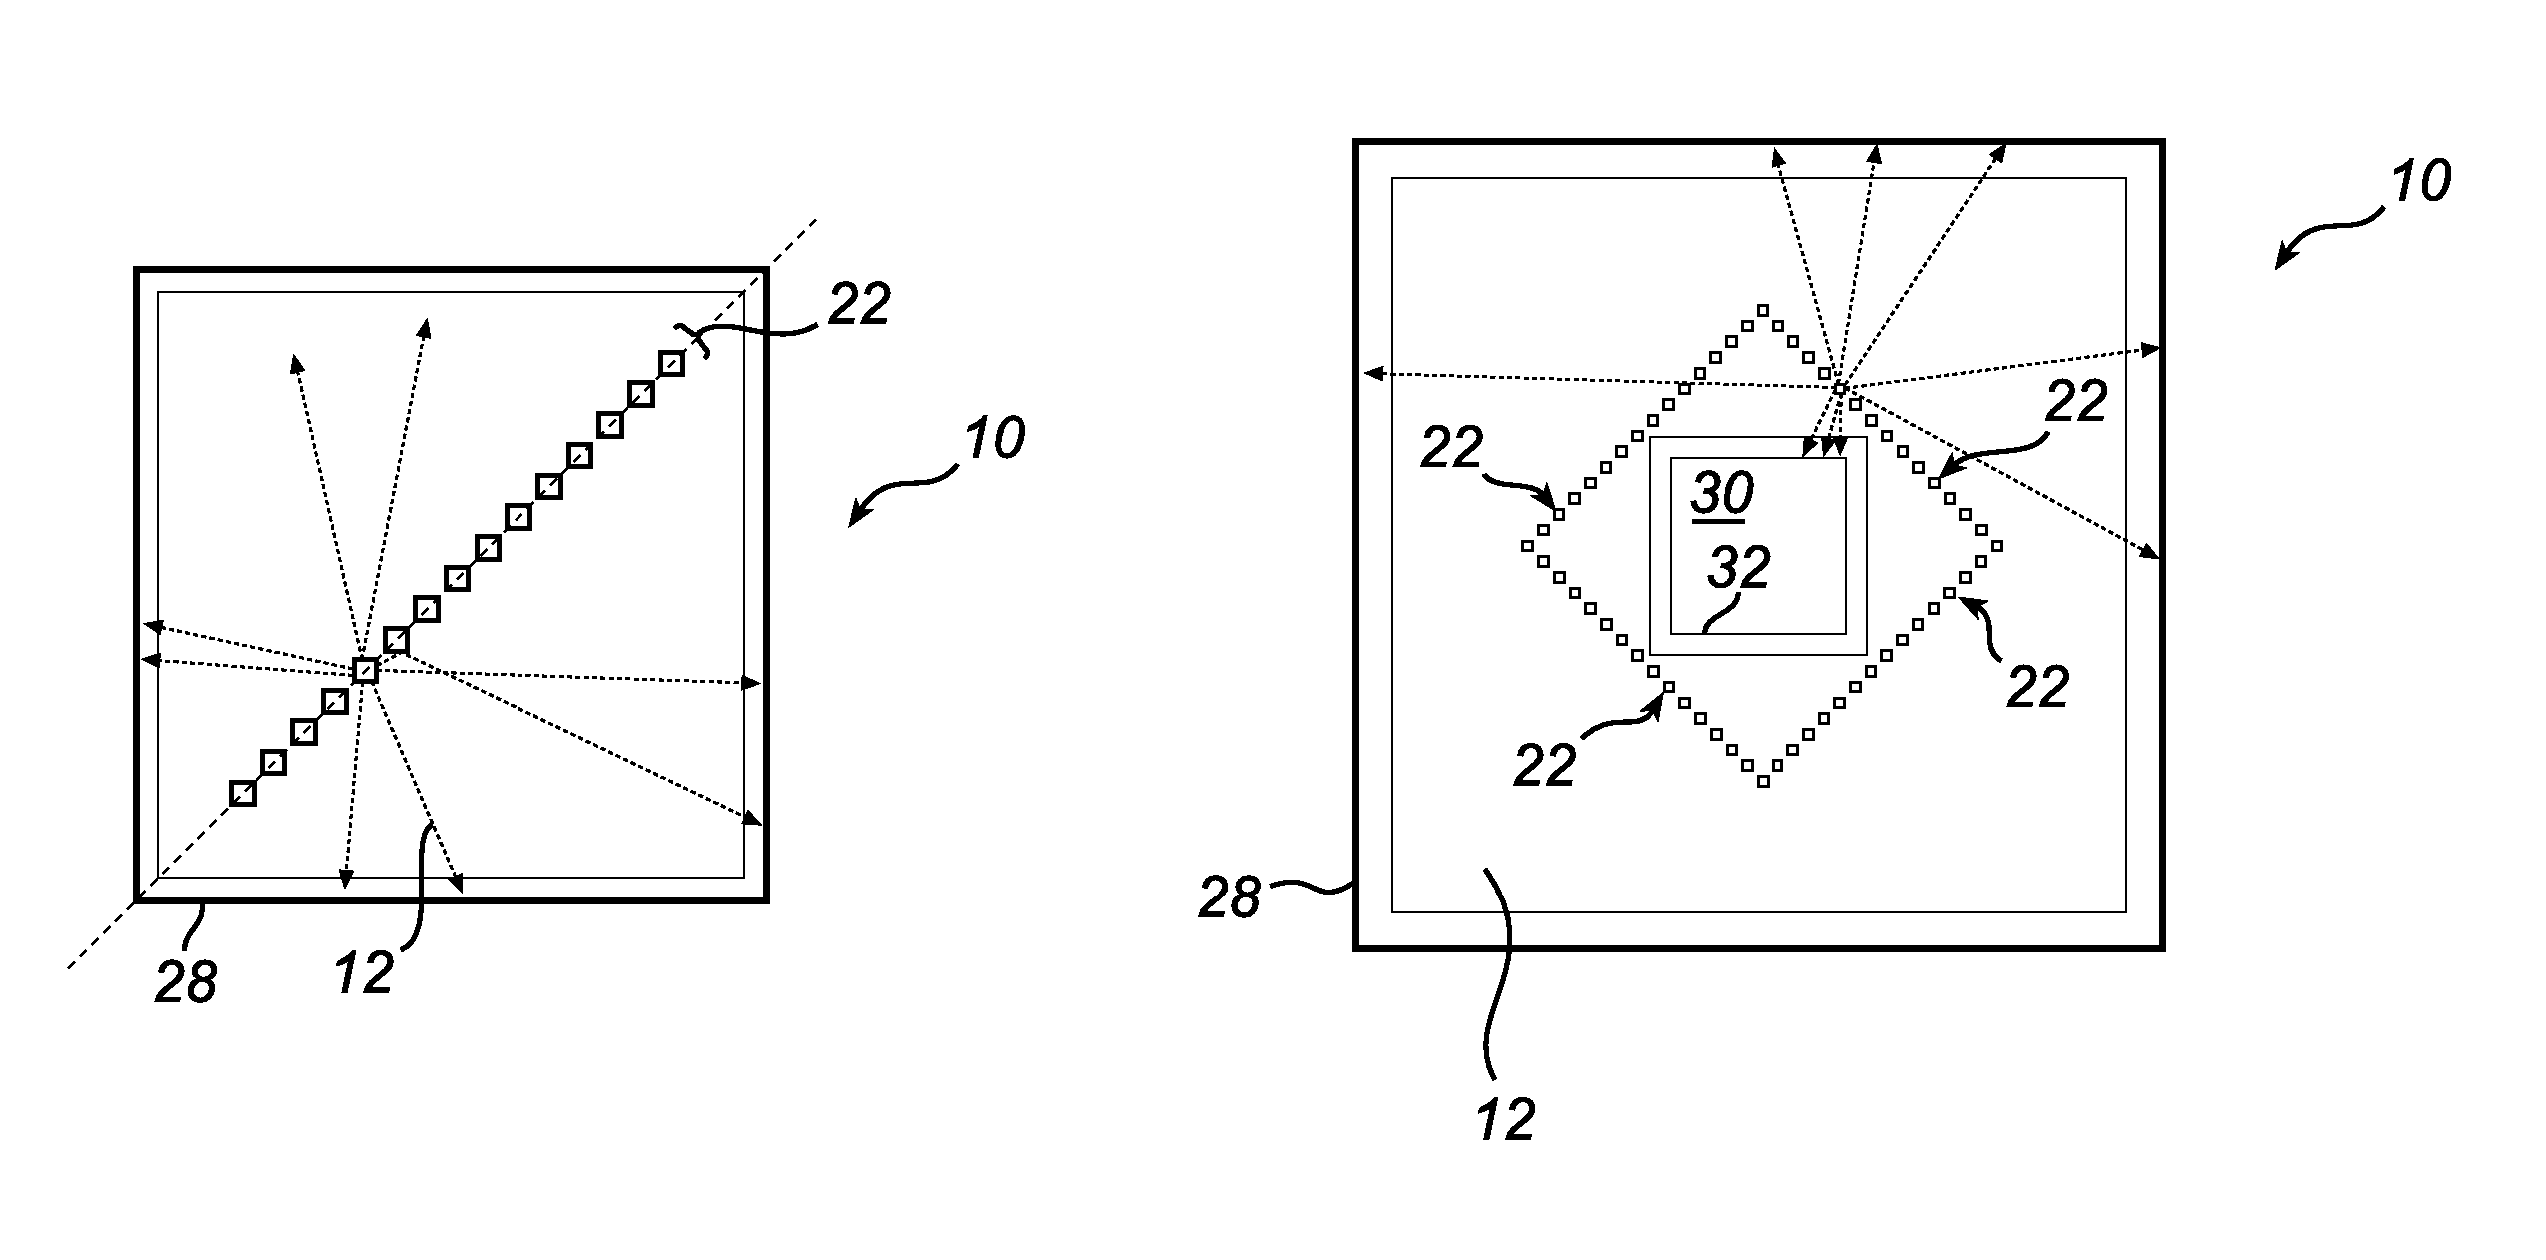 Lighting device employing a light guide plate and a plurality of light emitting diodes